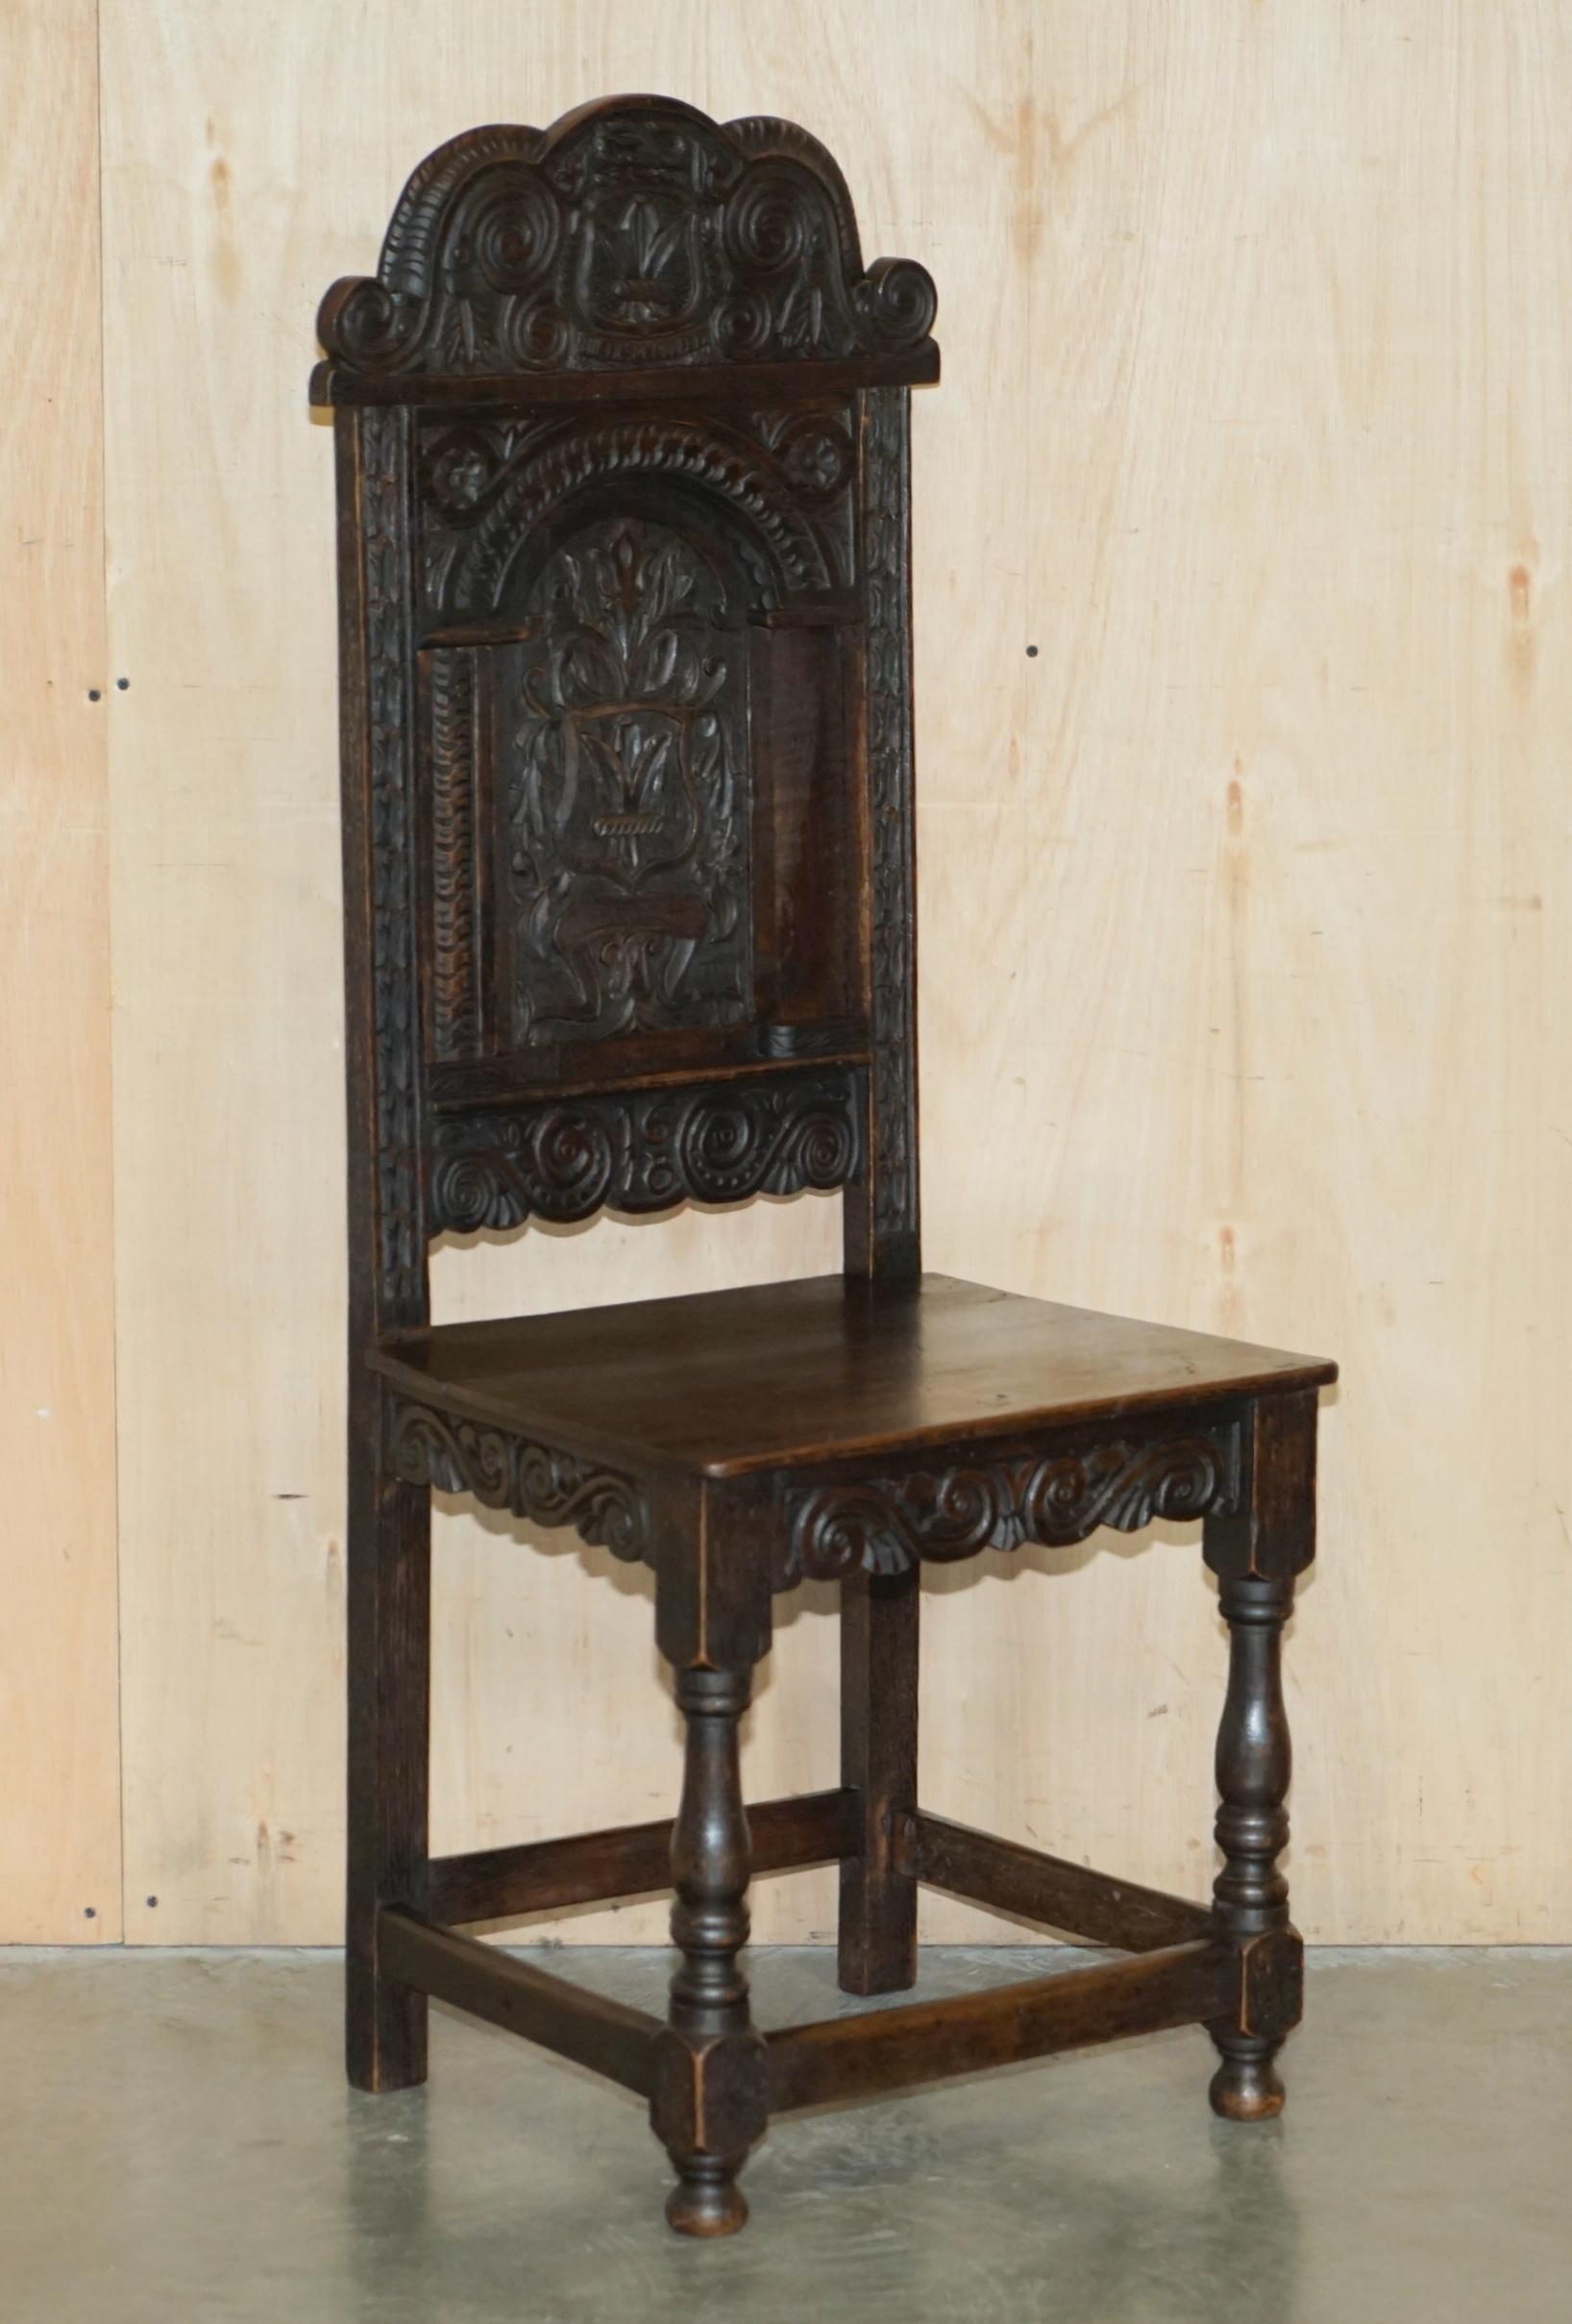 ANTIQUE PAIR OF 17TH CENTURY JACOBEAN ENGLISH OAK CHAIRS FROM THE FILM HELLBOy For Sale 7